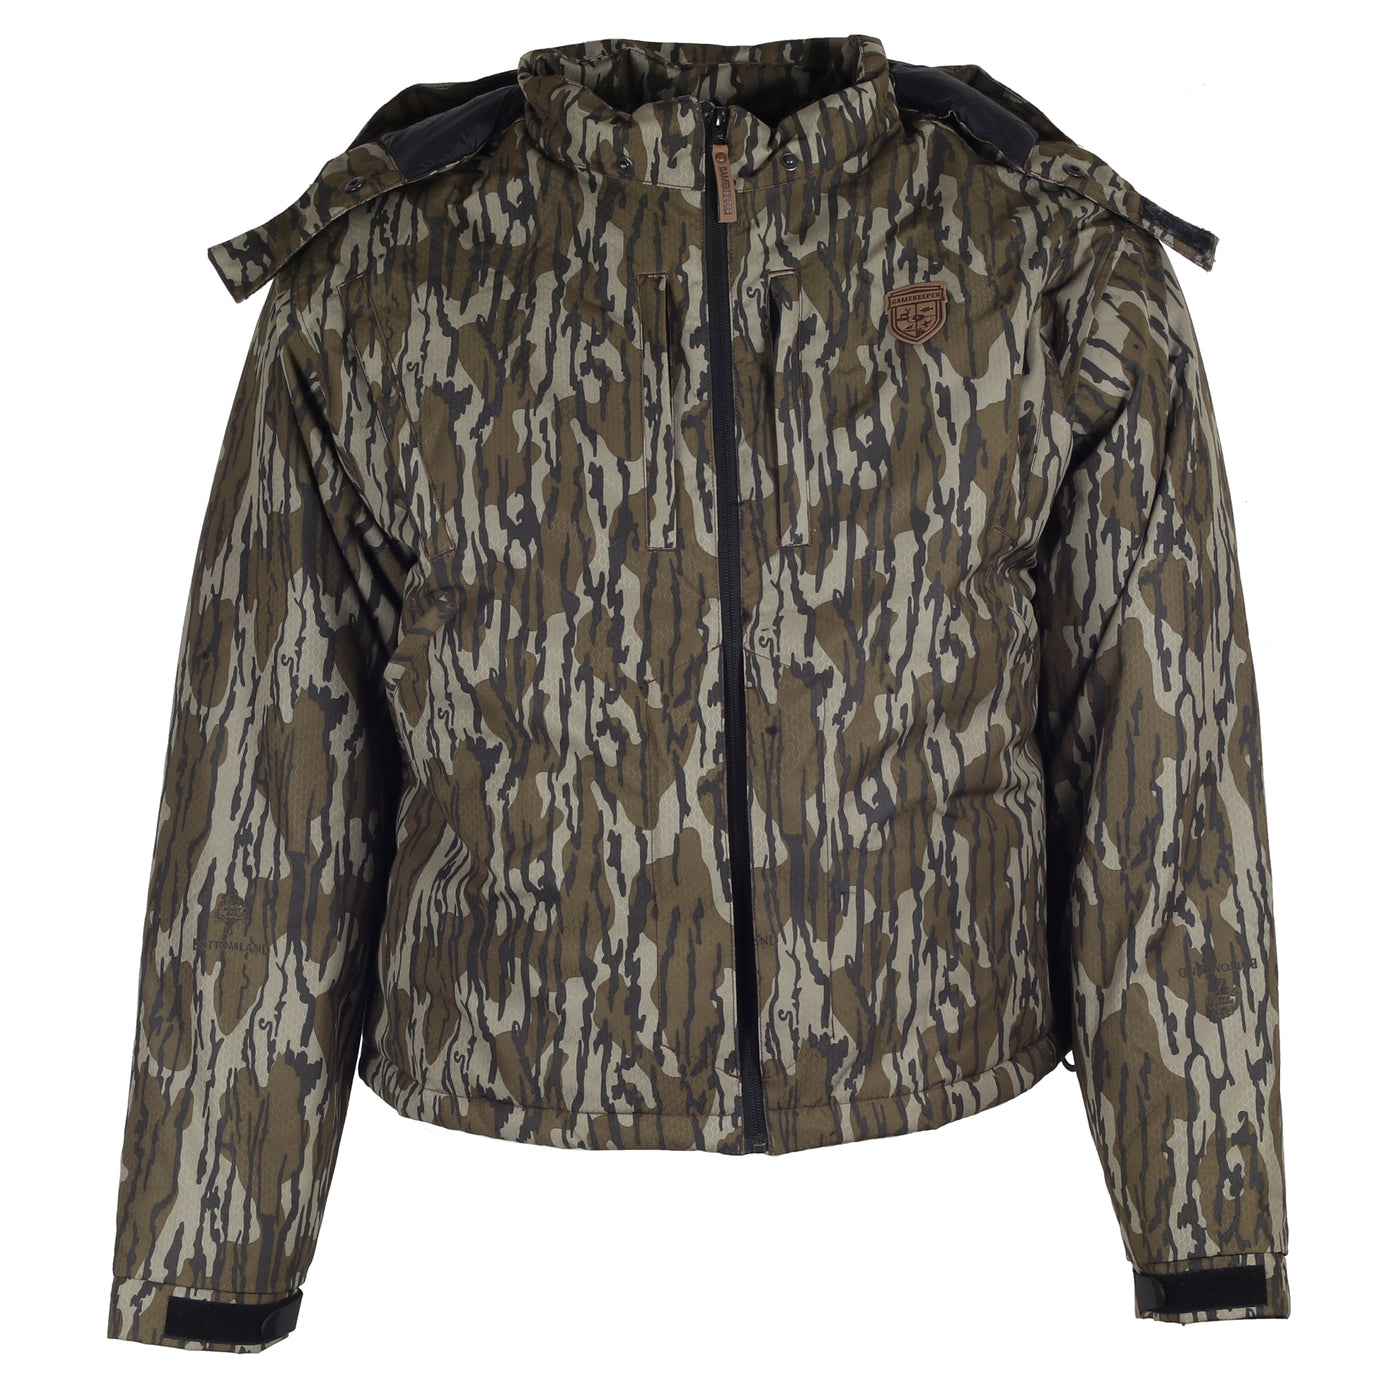 Gamekeeper Backwater Wader Jacket-CAMO CLOTHING-Kevin's Fine Outdoor Gear & Apparel